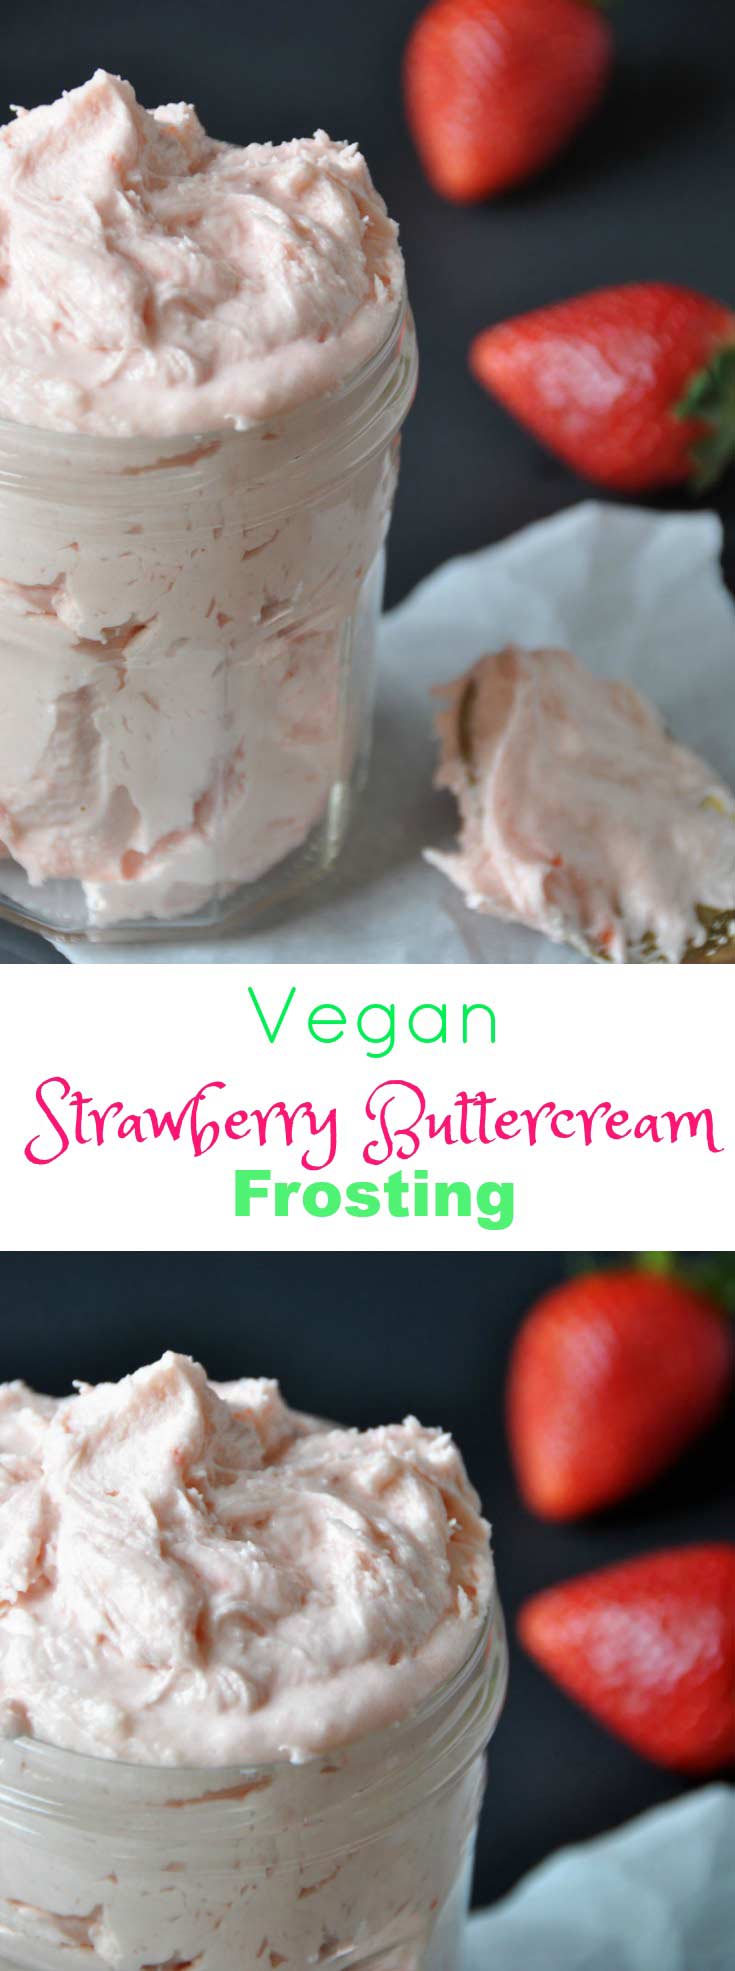 Homemade, 3 ingredient, vegan strawberry buttercream frosting! Made with fresh strawberries.